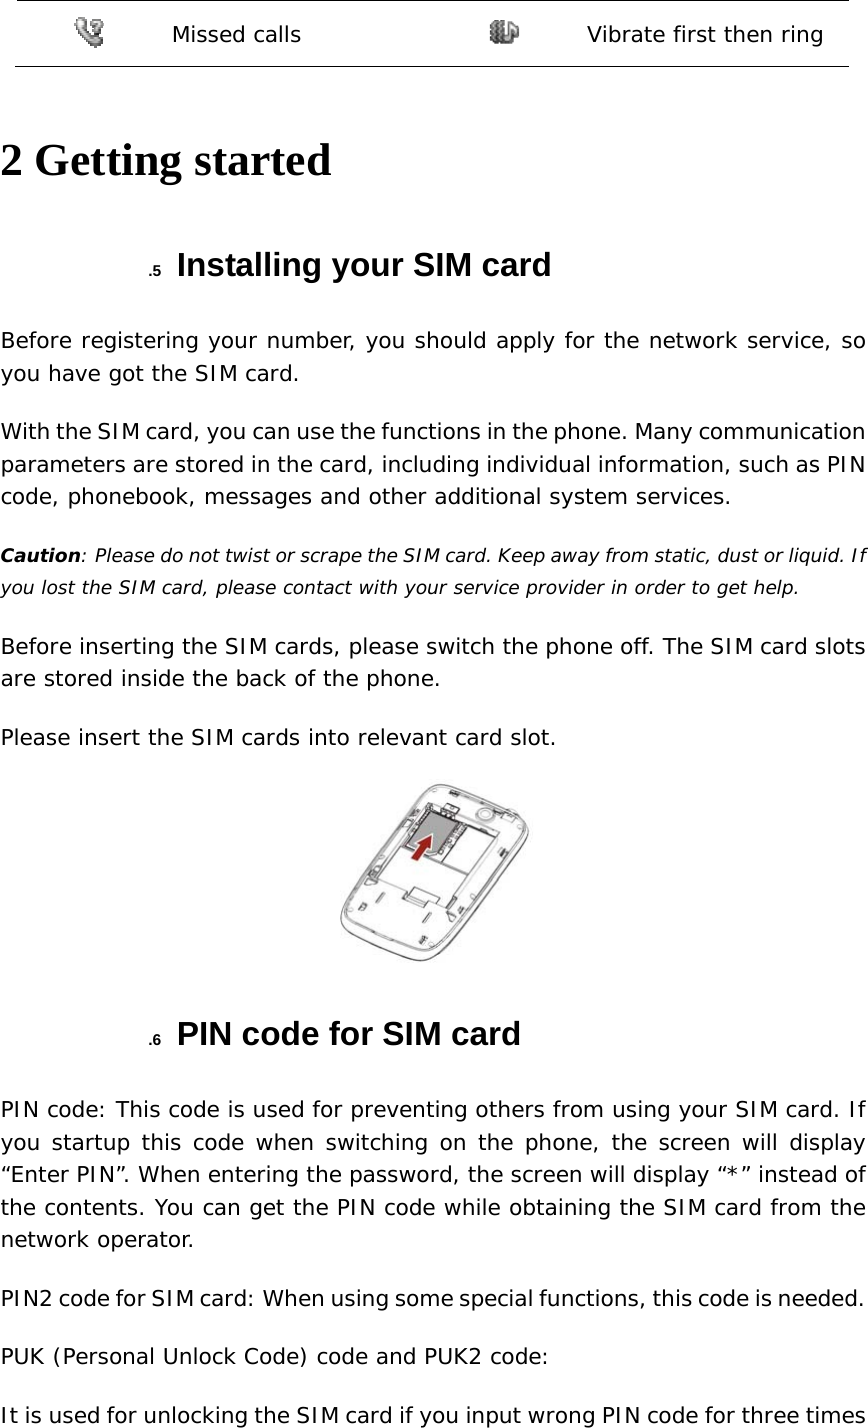  Missed calls   Vibrate first then ring  2 Getting started .5  Installing your SIM card Before registering your number, you should apply for the network service, so you have got the SIM card. With the SIM card, you can use the functions in the phone. Many communication parameters are stored in the card, including individual information, such as PIN code, phonebook, messages and other additional system services. Caution: Please do not twist or scrape the SIM card. Keep away from static, dust or liquid. If you lost the SIM card, please contact with your service provider in order to get help. Before inserting the SIM cards, please switch the phone off. The SIM card slots are stored inside the back of the phone. Please insert the SIM cards into relevant card slot.  .6  PIN code for SIM card PIN code: This code is used for preventing others from using your SIM card. If you startup this code when switching on the phone, the screen will display “Enter PIN”. When entering the password, the screen will display “*” instead of the contents. You can get the PIN code while obtaining the SIM card from the network operator. PIN2 code for SIM card: When using some special functions, this code is needed. PUK (Personal Unlock Code) code and PUK2 code: It is used for unlocking the SIM card if you input wrong PIN code for three times 